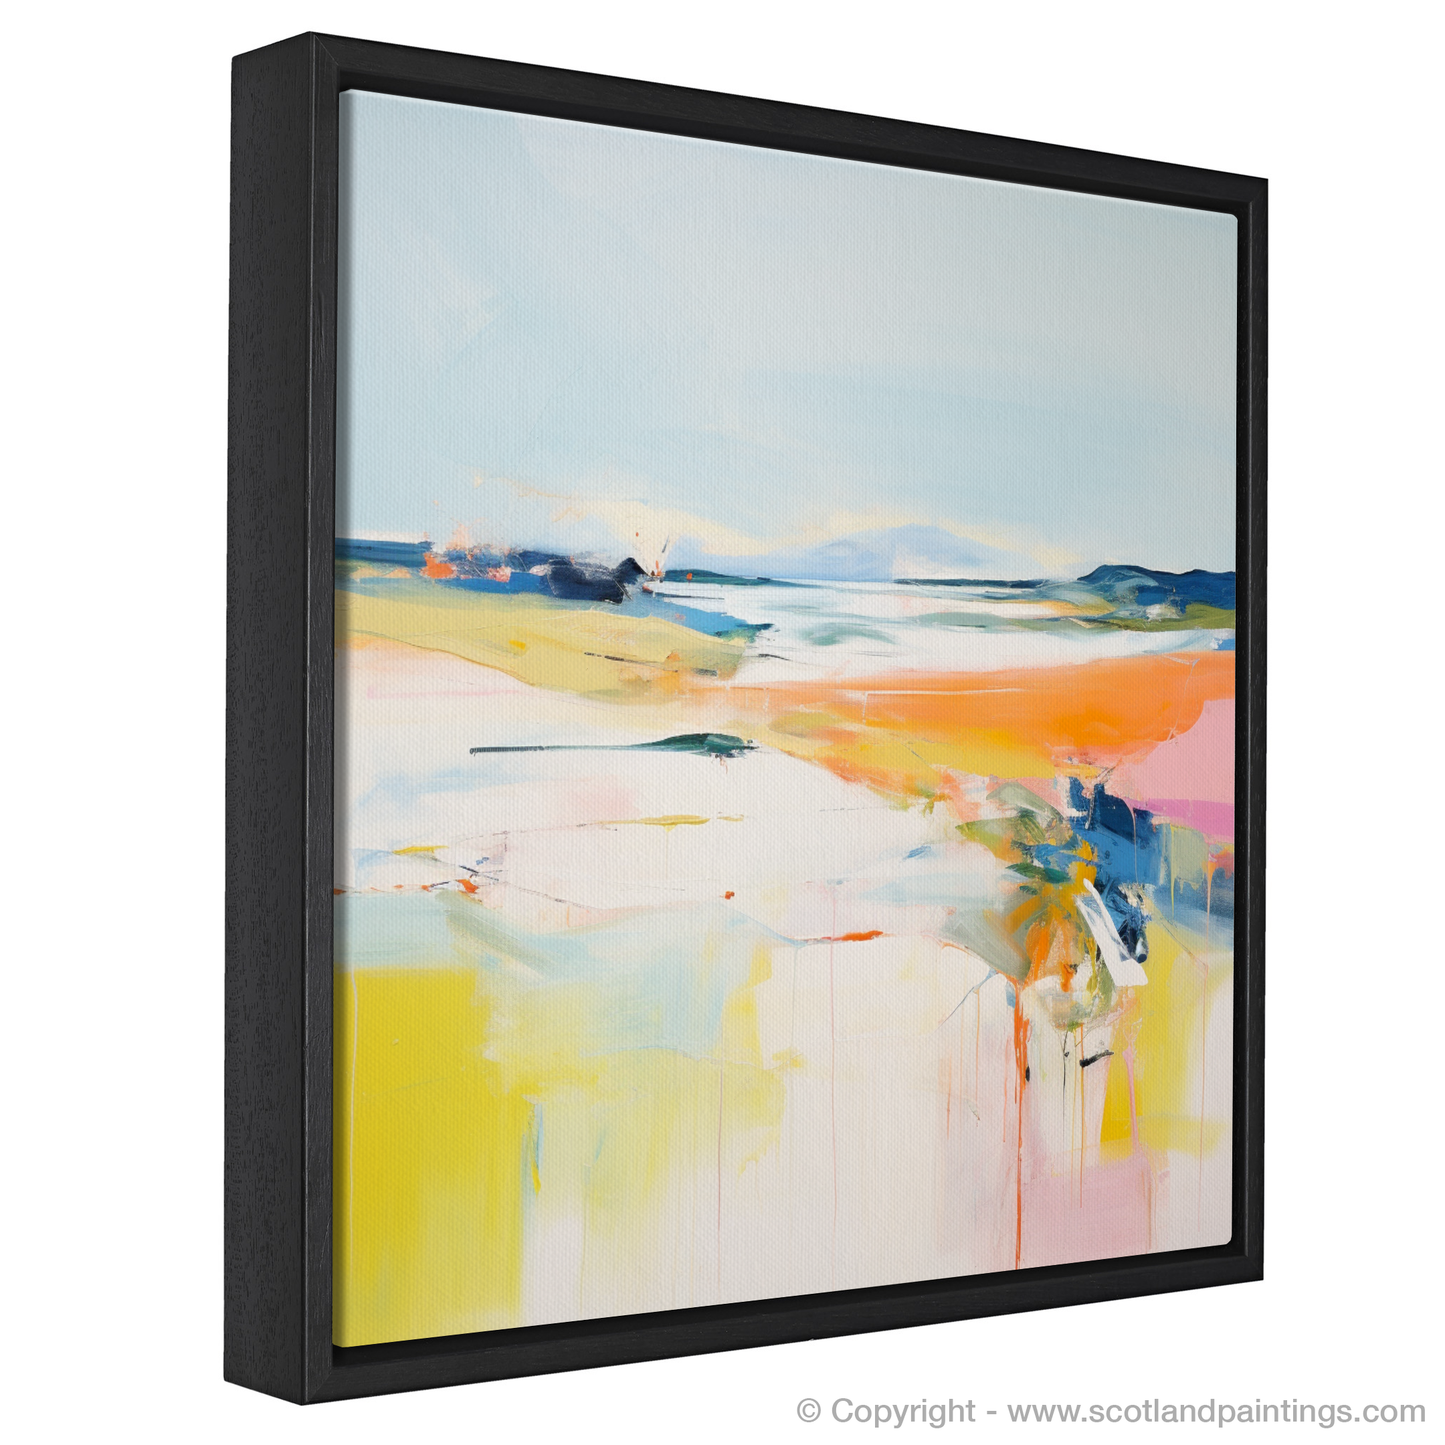 Painting and Art Print of Isle of Tiree, Inner Hebrides in summer entitled "Summer Abstraction: Isle of Tiree".